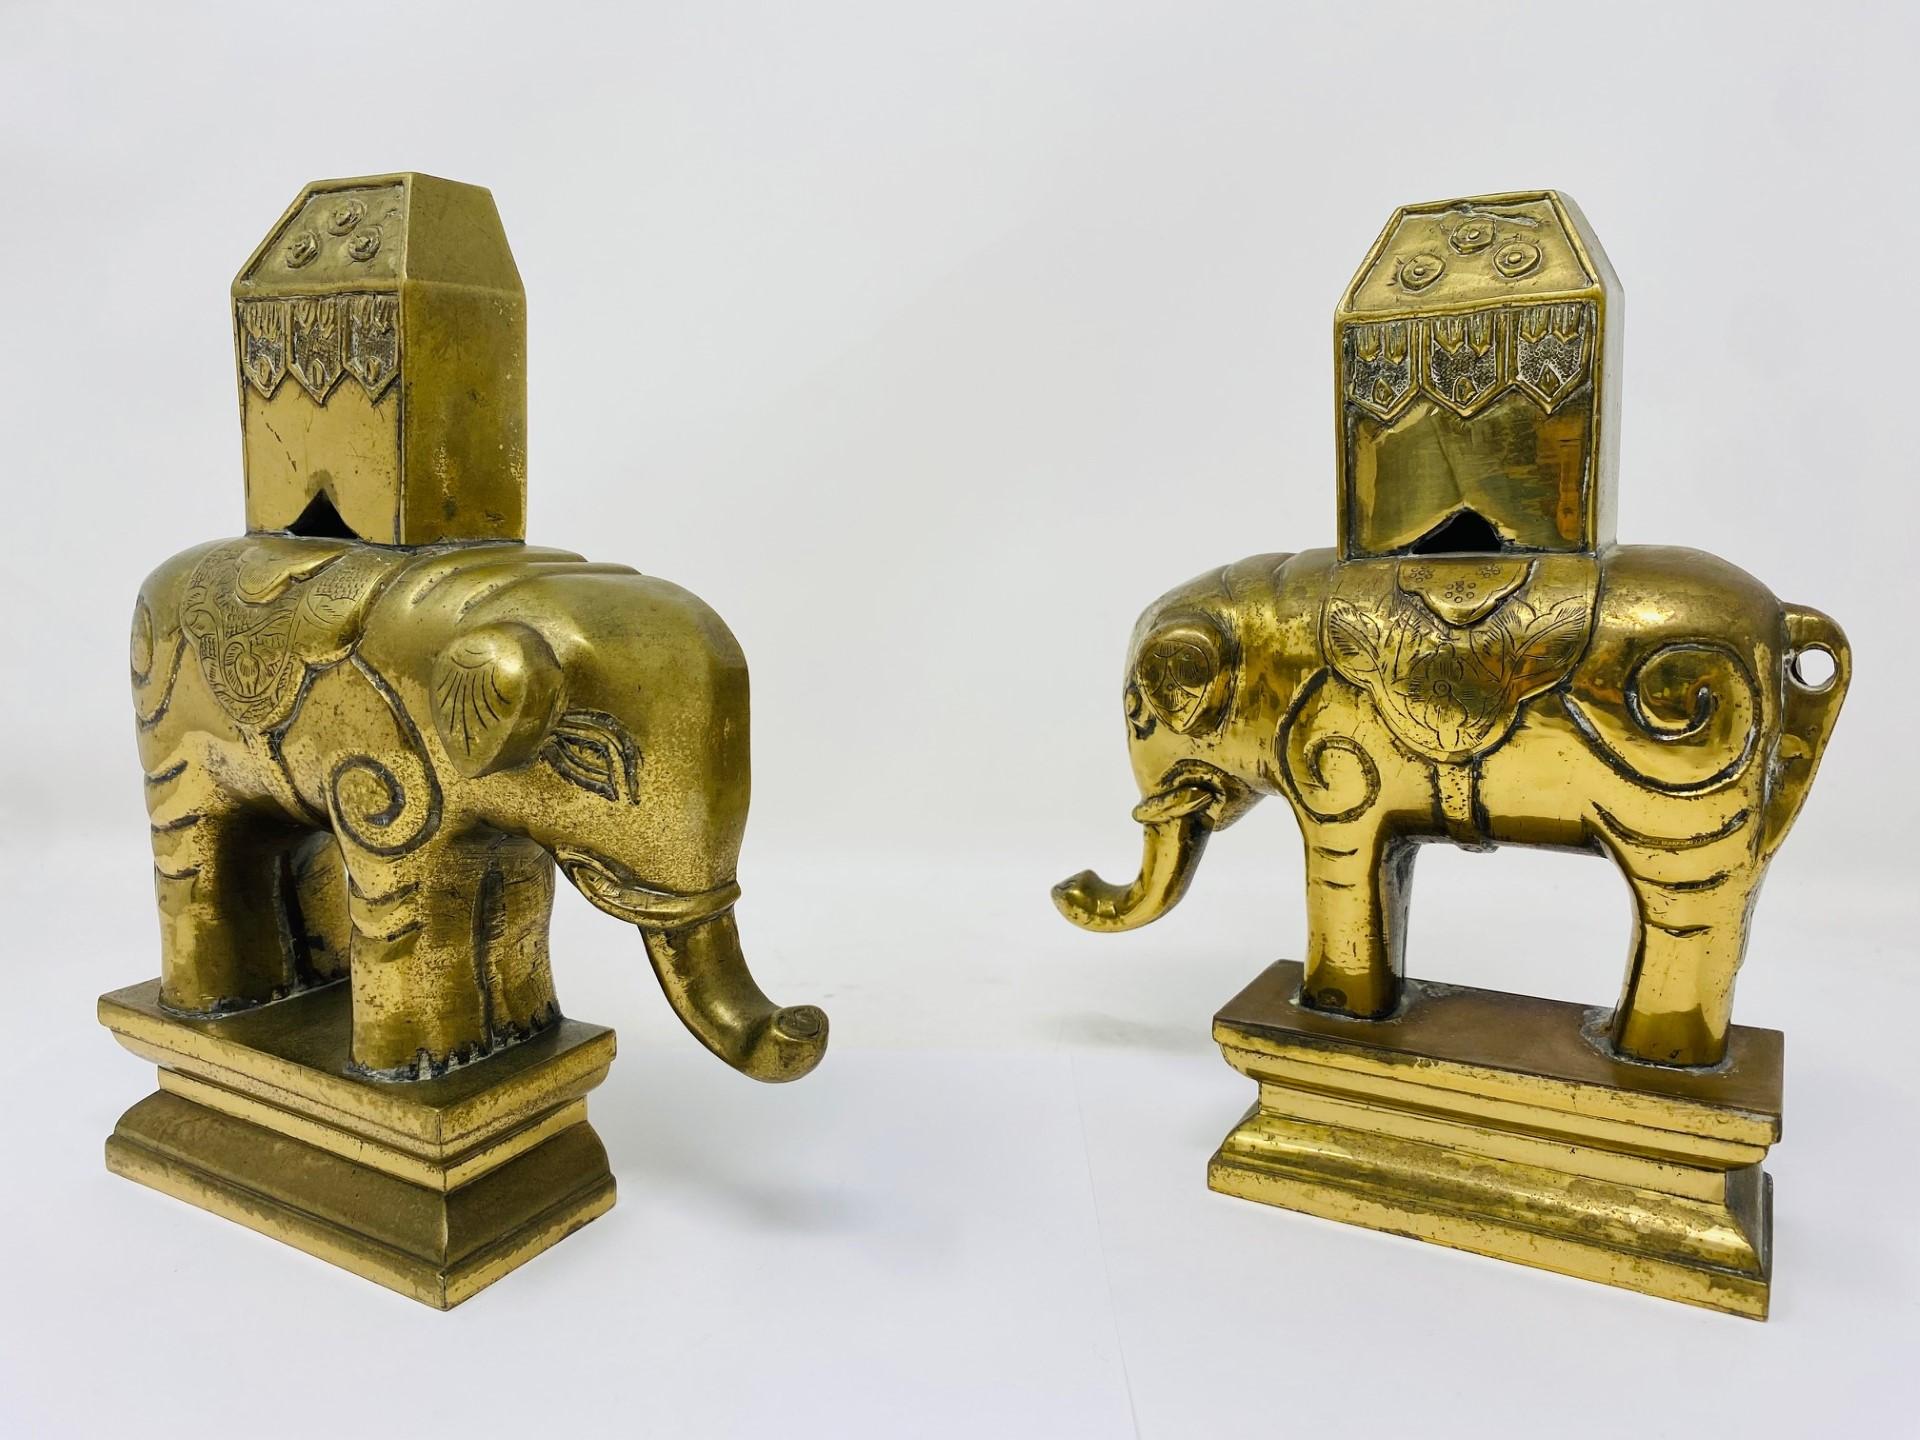 Hollywood Regency Vintage 1940s Pair of Sculptural Elephant Bookends in Solid Brass For Sale